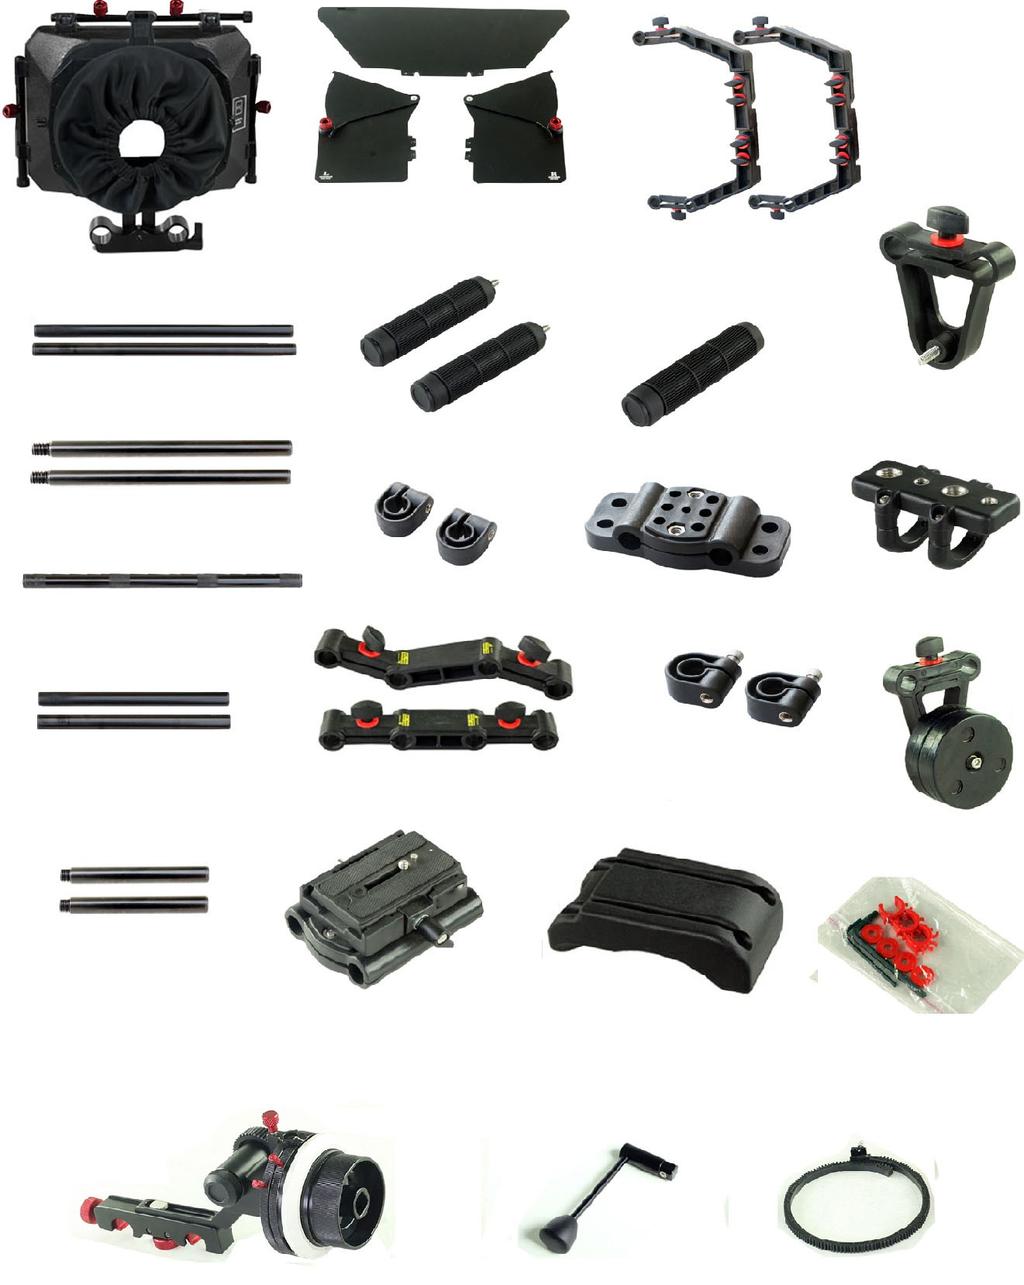 FILMCITY POWER SHOULDER RIG 2 I N T R O D U C T I O N Our Filmcity Shoulder Rig kit meets and exceeds the requirement of DSLR users by providing professional look production value at an affordable